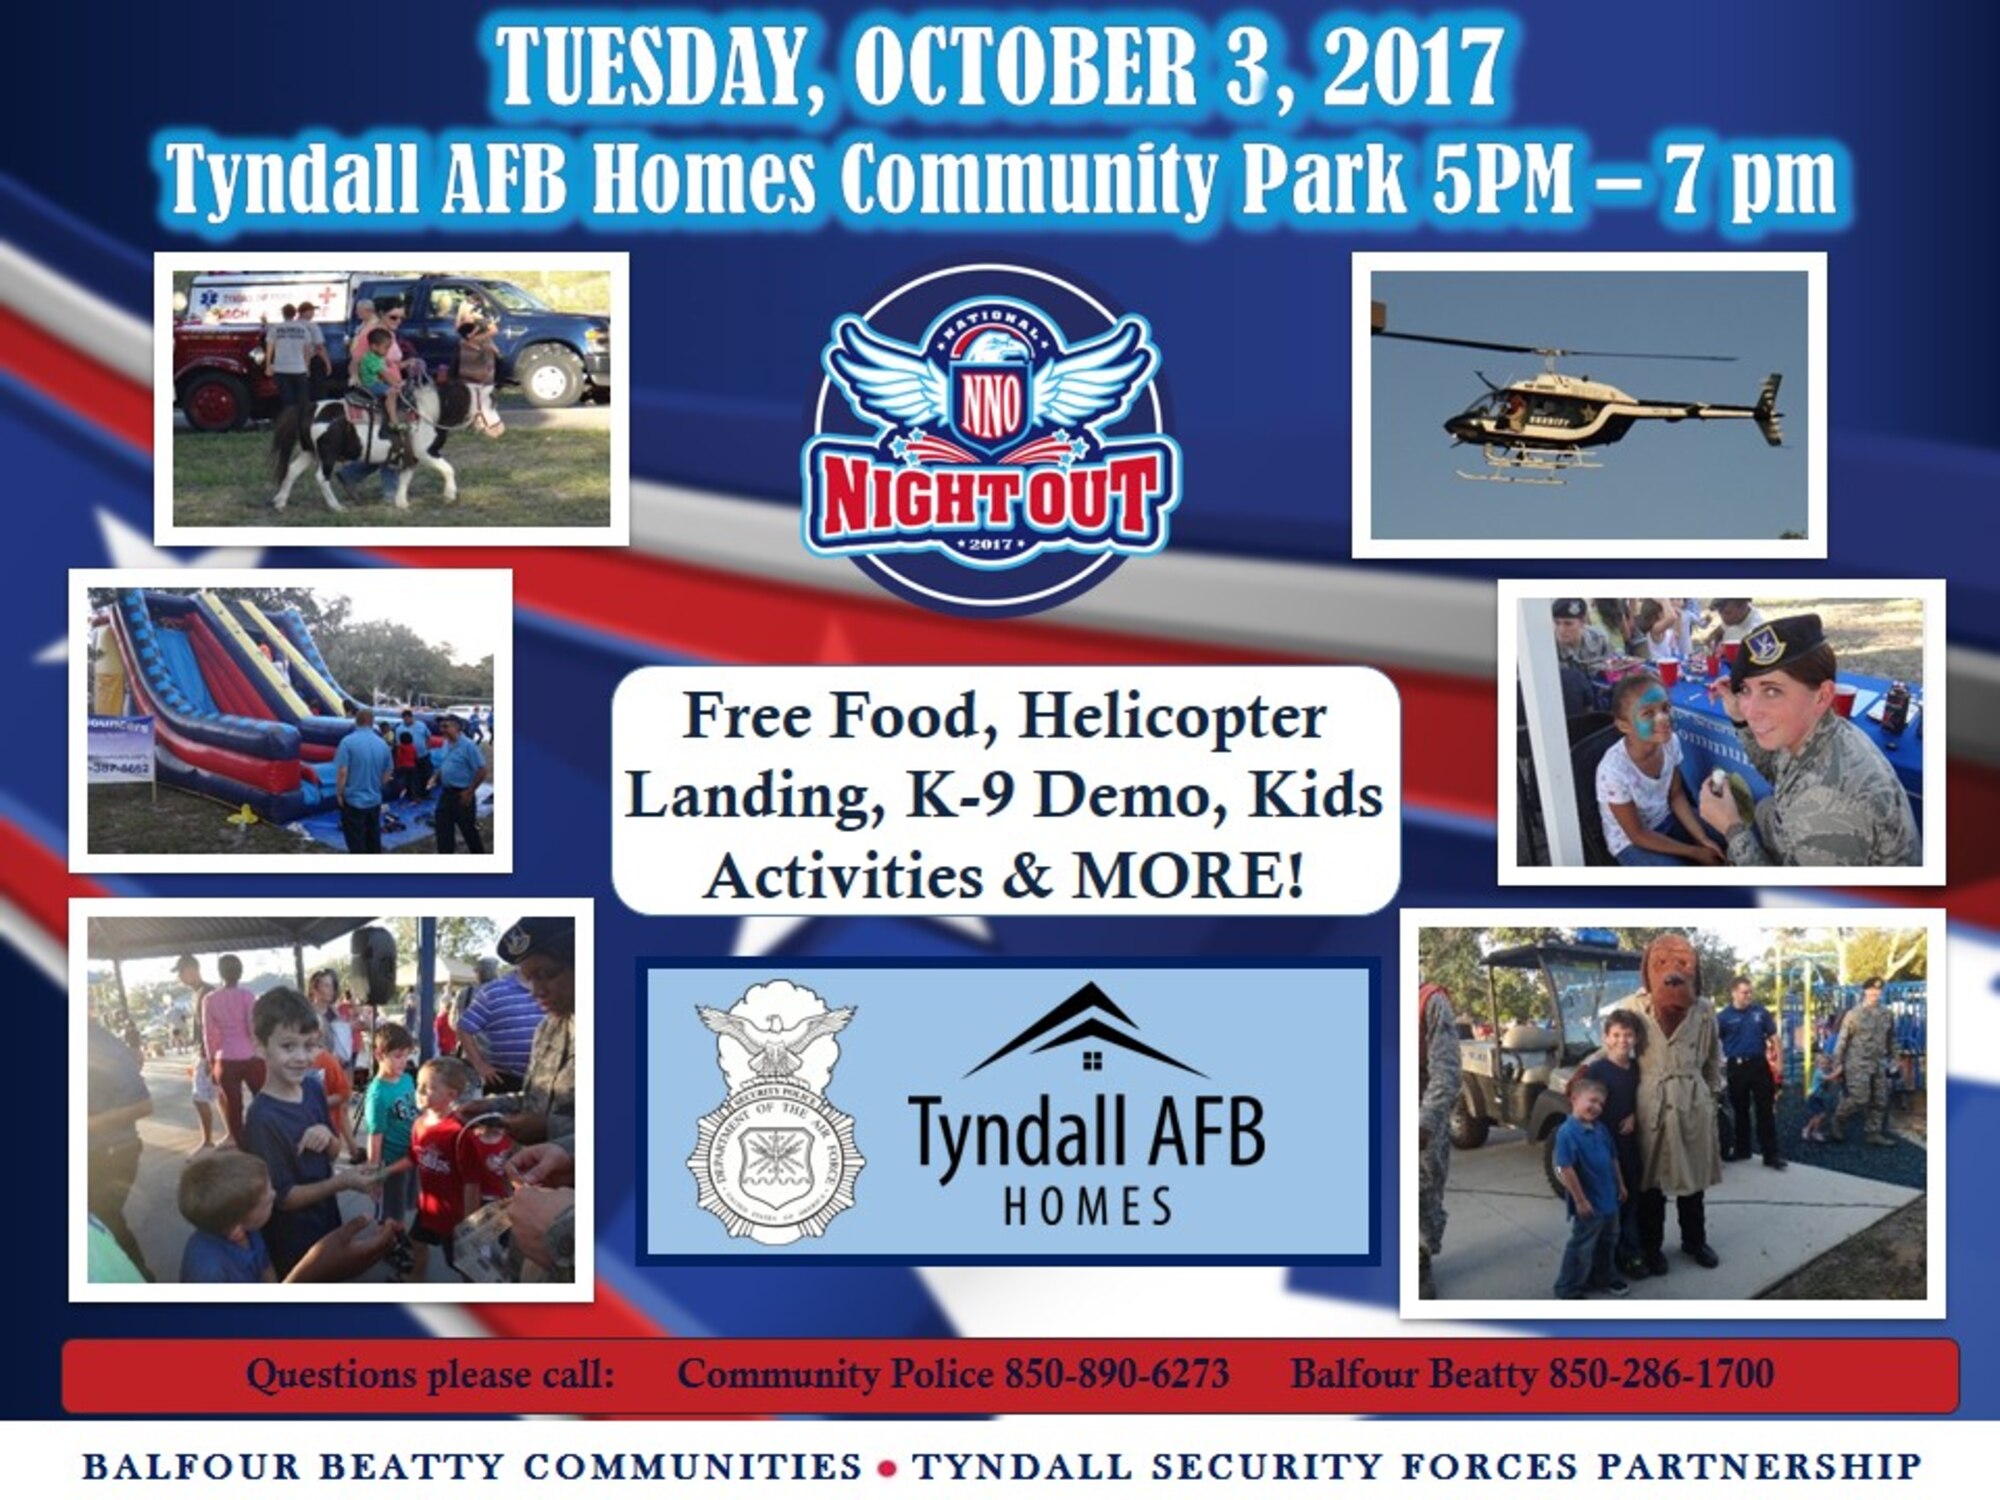 The 325th Security Forces Squadron and Balfour Beatty Communities are scheduled to host their free annual National Night Out from 5 p.m. to 7 p.m. Oct. 3, 2017, at the Balfour Beatty Community Center.